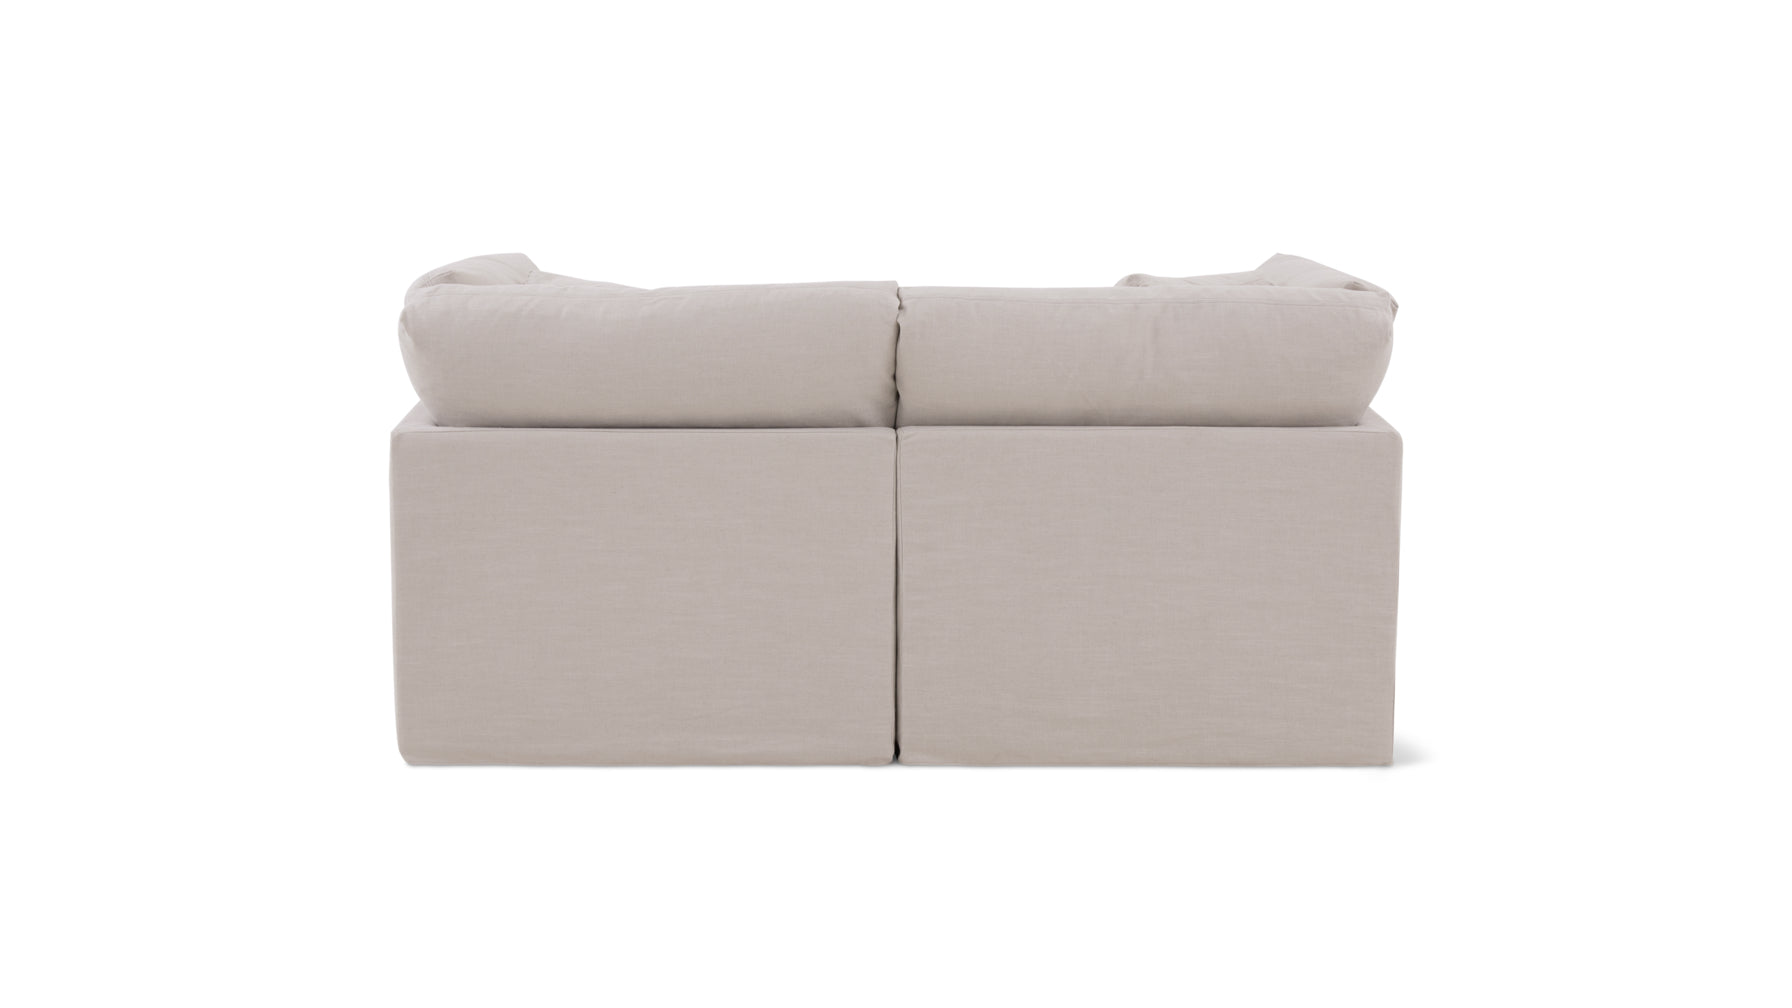 Get Together™ 3-Piece Modular Sectional, Standard, Clay - Image 6